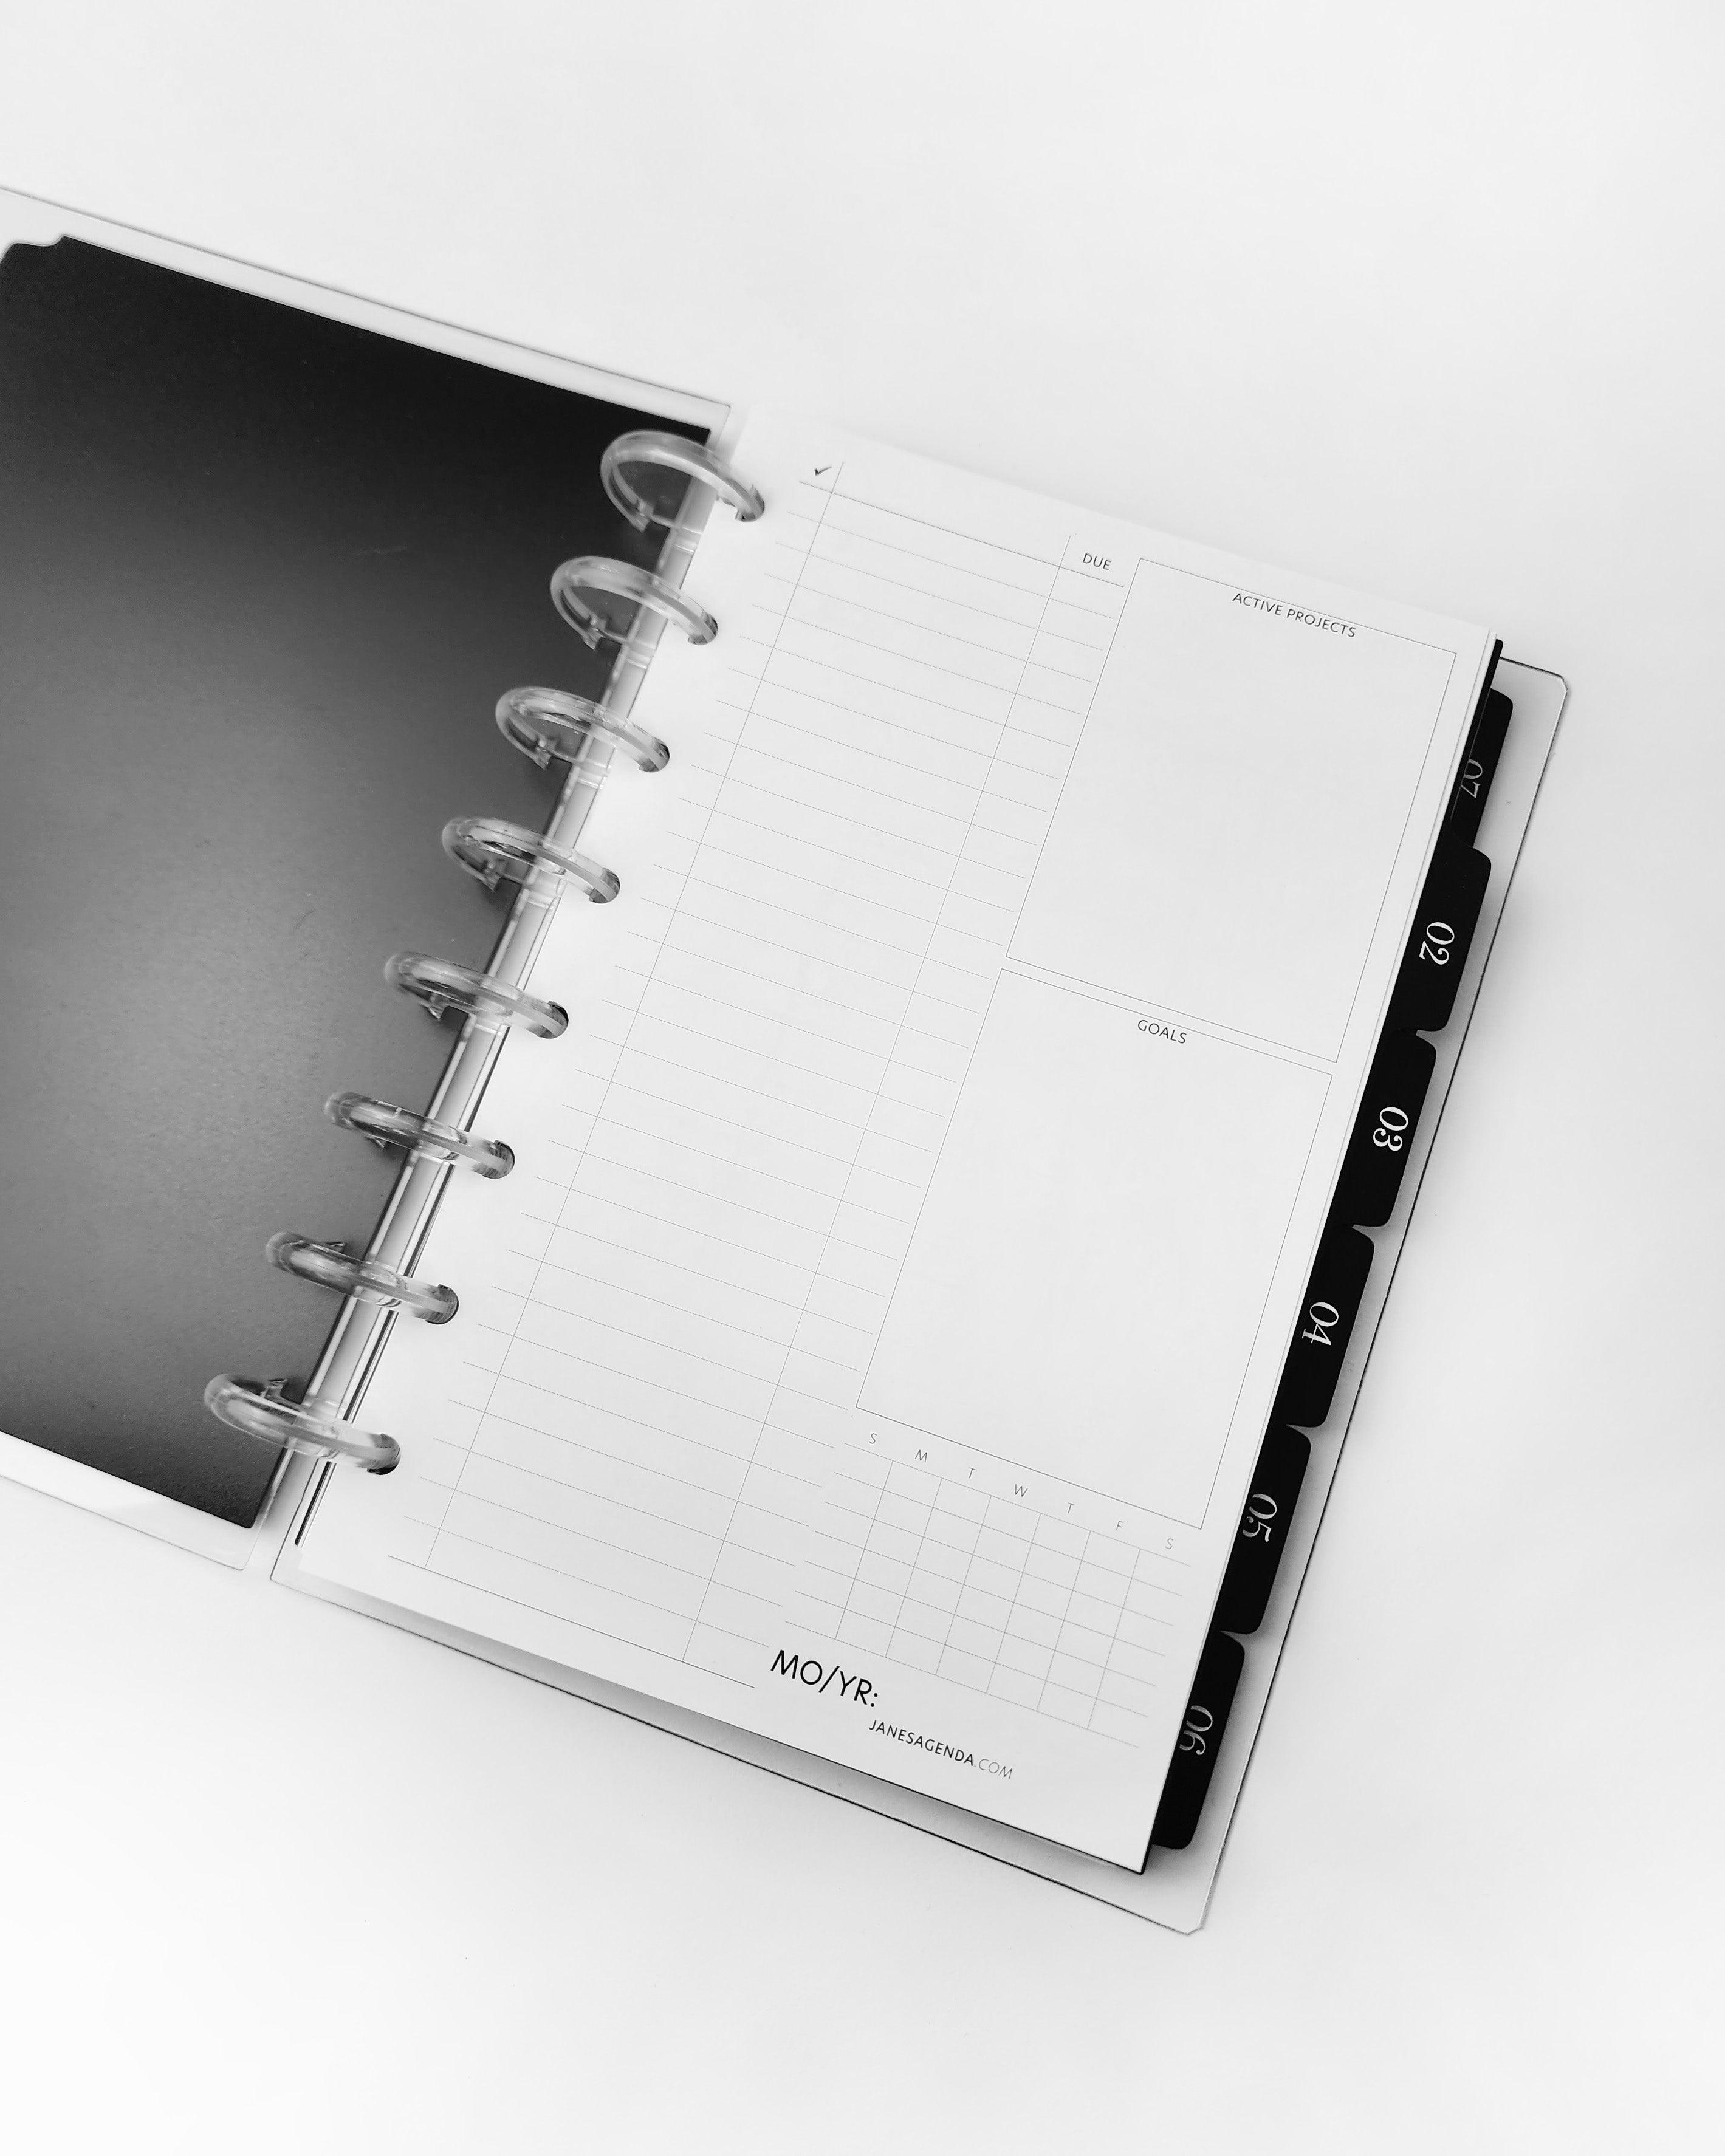 My current planner setup: A5 ring agenda for my desk. I use weekly